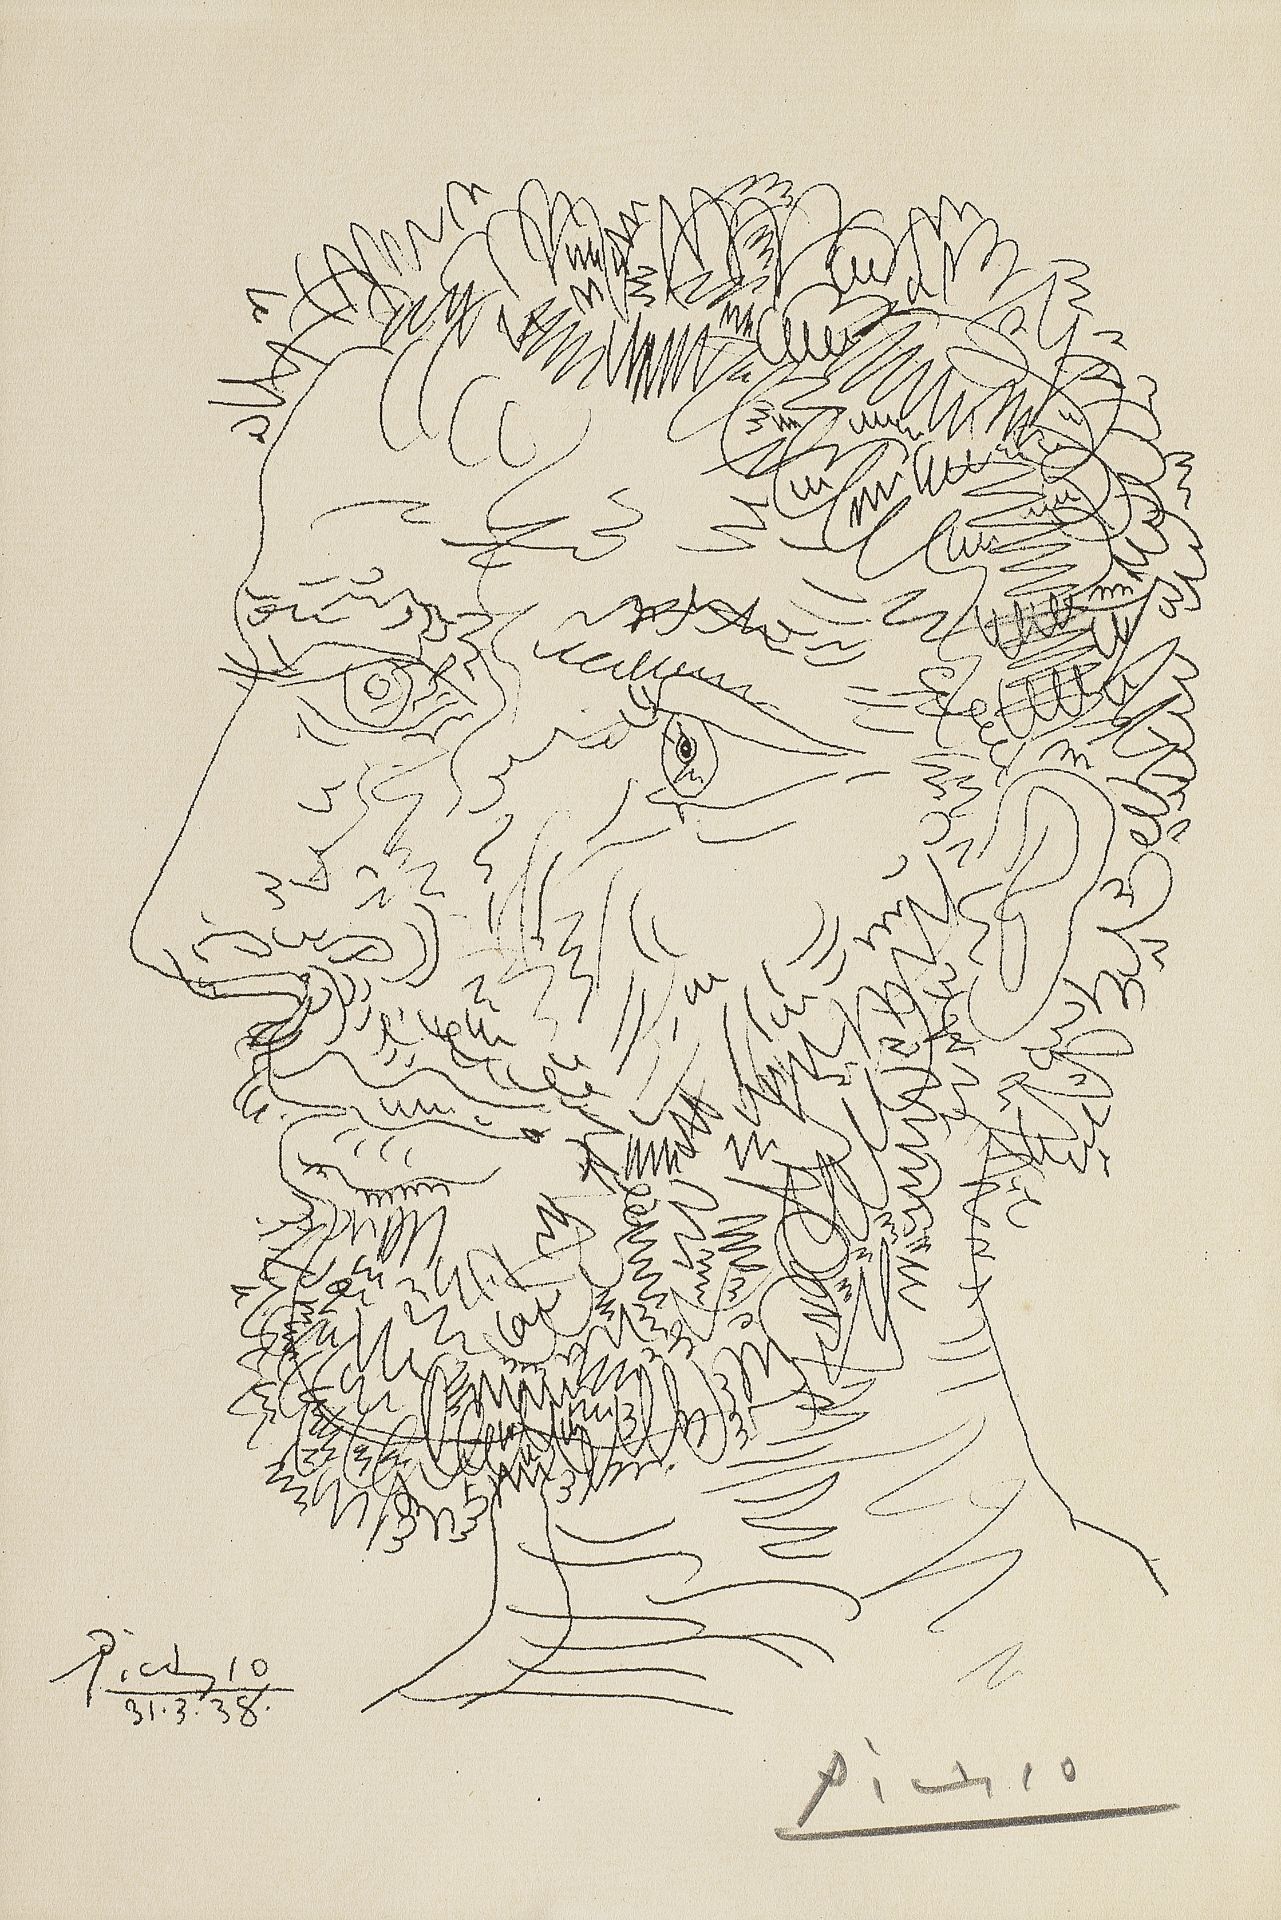 PABLO PICASSO 1881 &#8211; 1973, Profil d'homme Barbu, 1938, Hectograph, an edition of approximat...